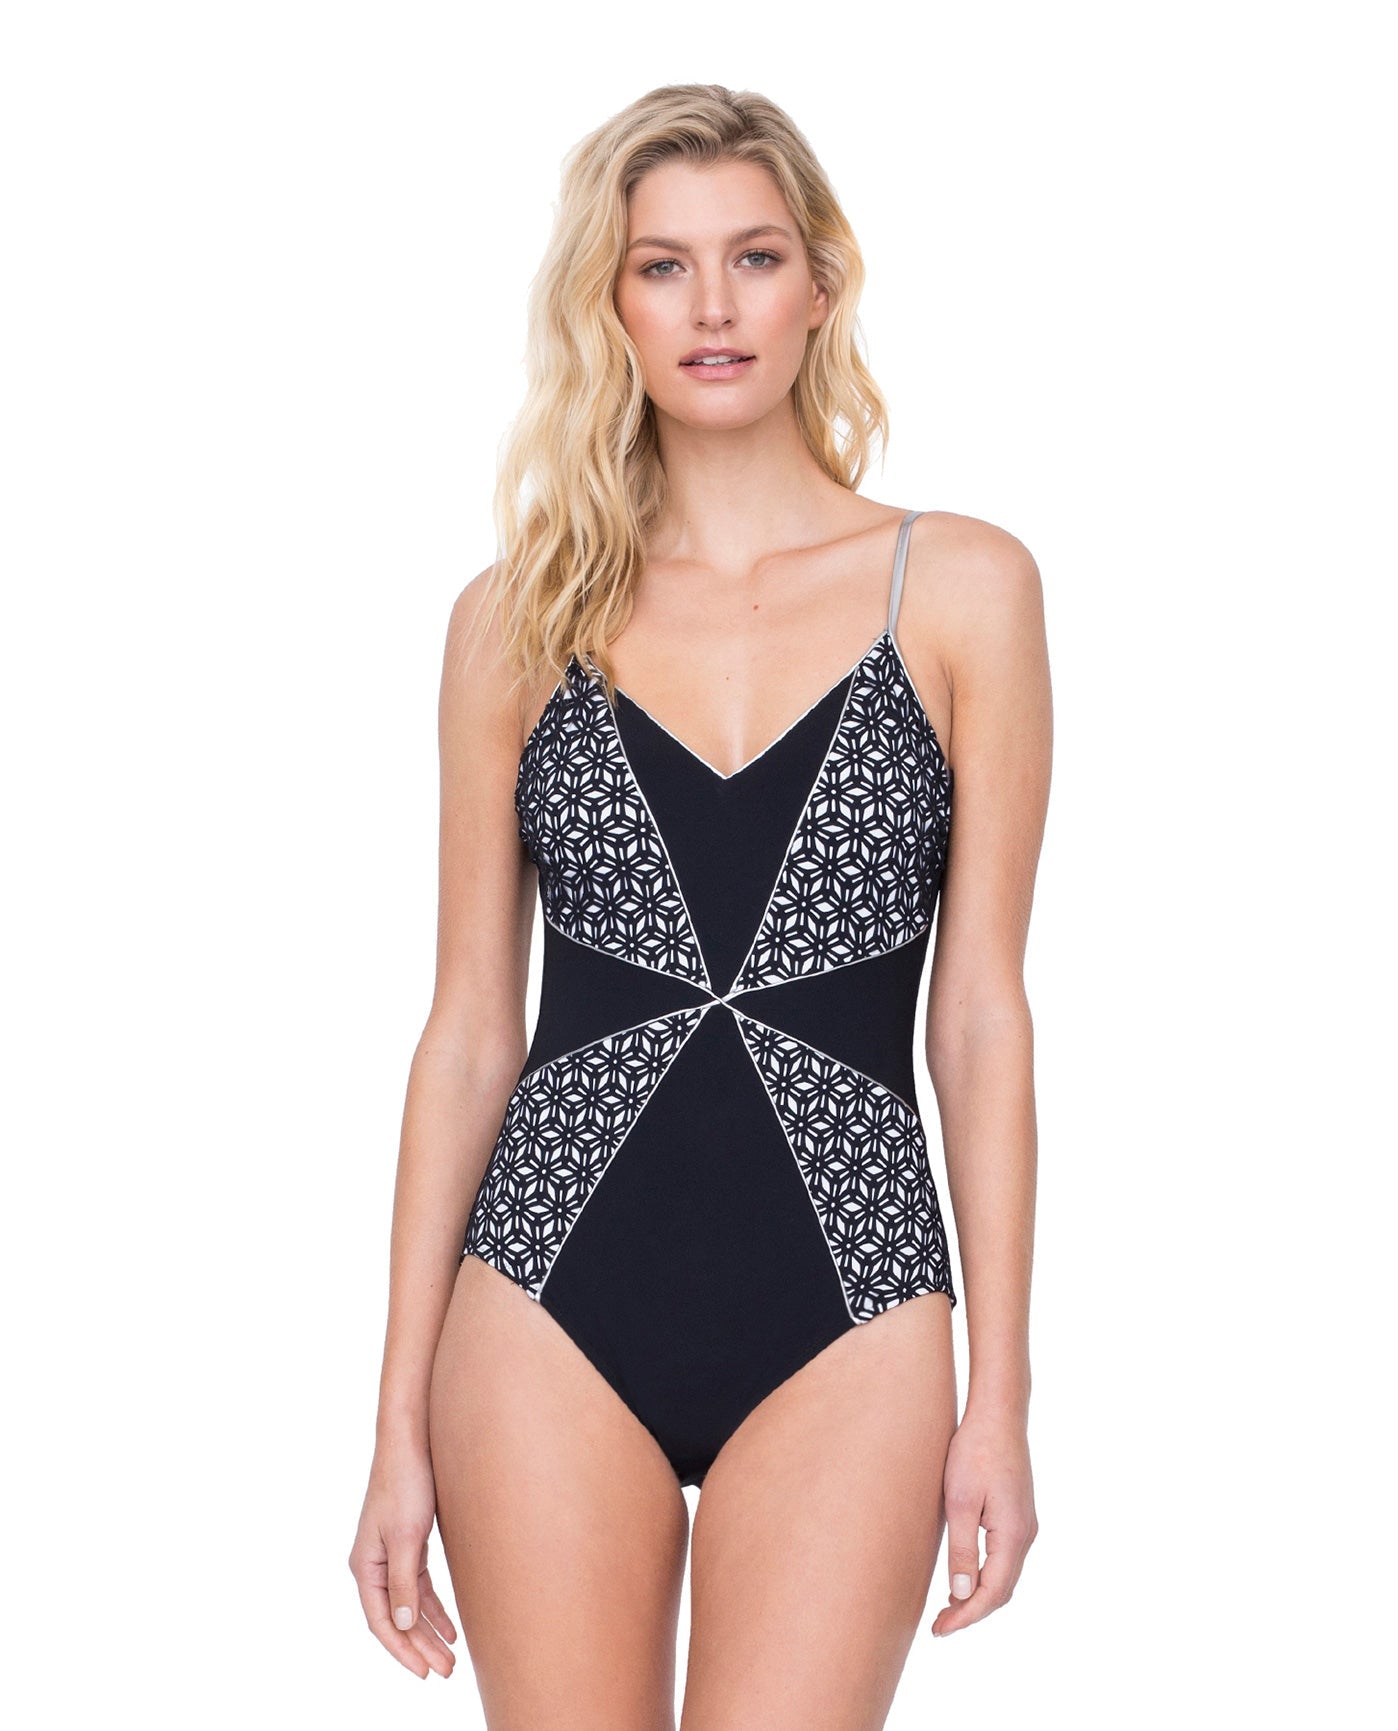 Front View Of Gottex Prism Full Coverage V-Neck Lingerie High Back One Piece Swimsuit | Gottex Prism